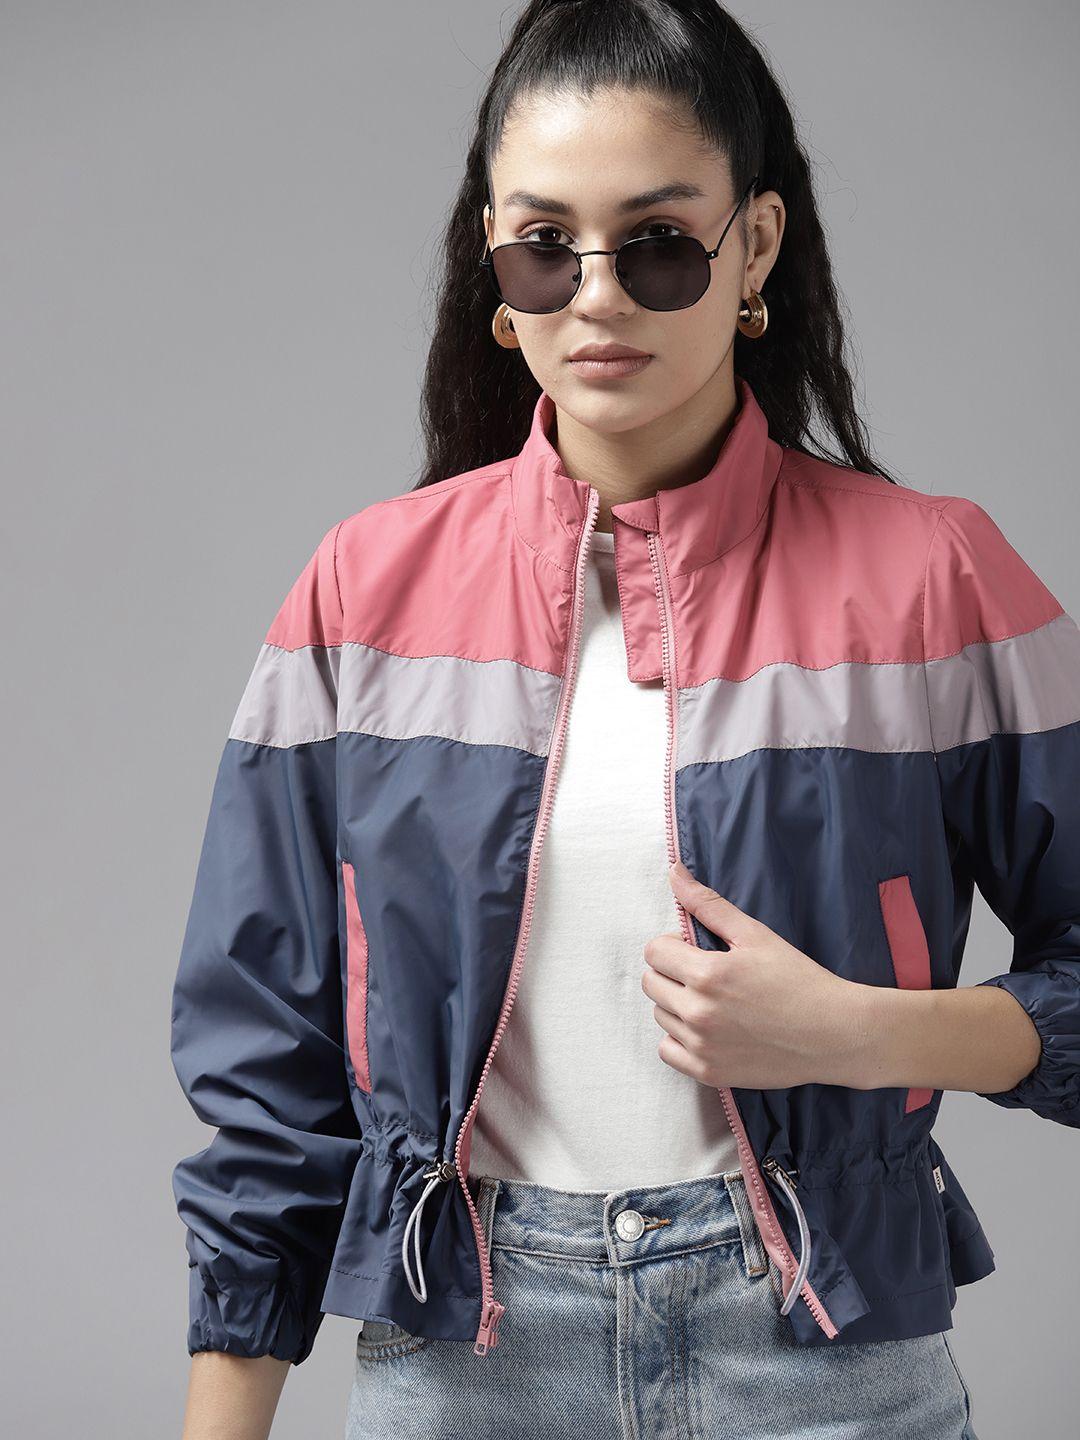 the roadster lifestyle co. women colourblocked tailored jacket